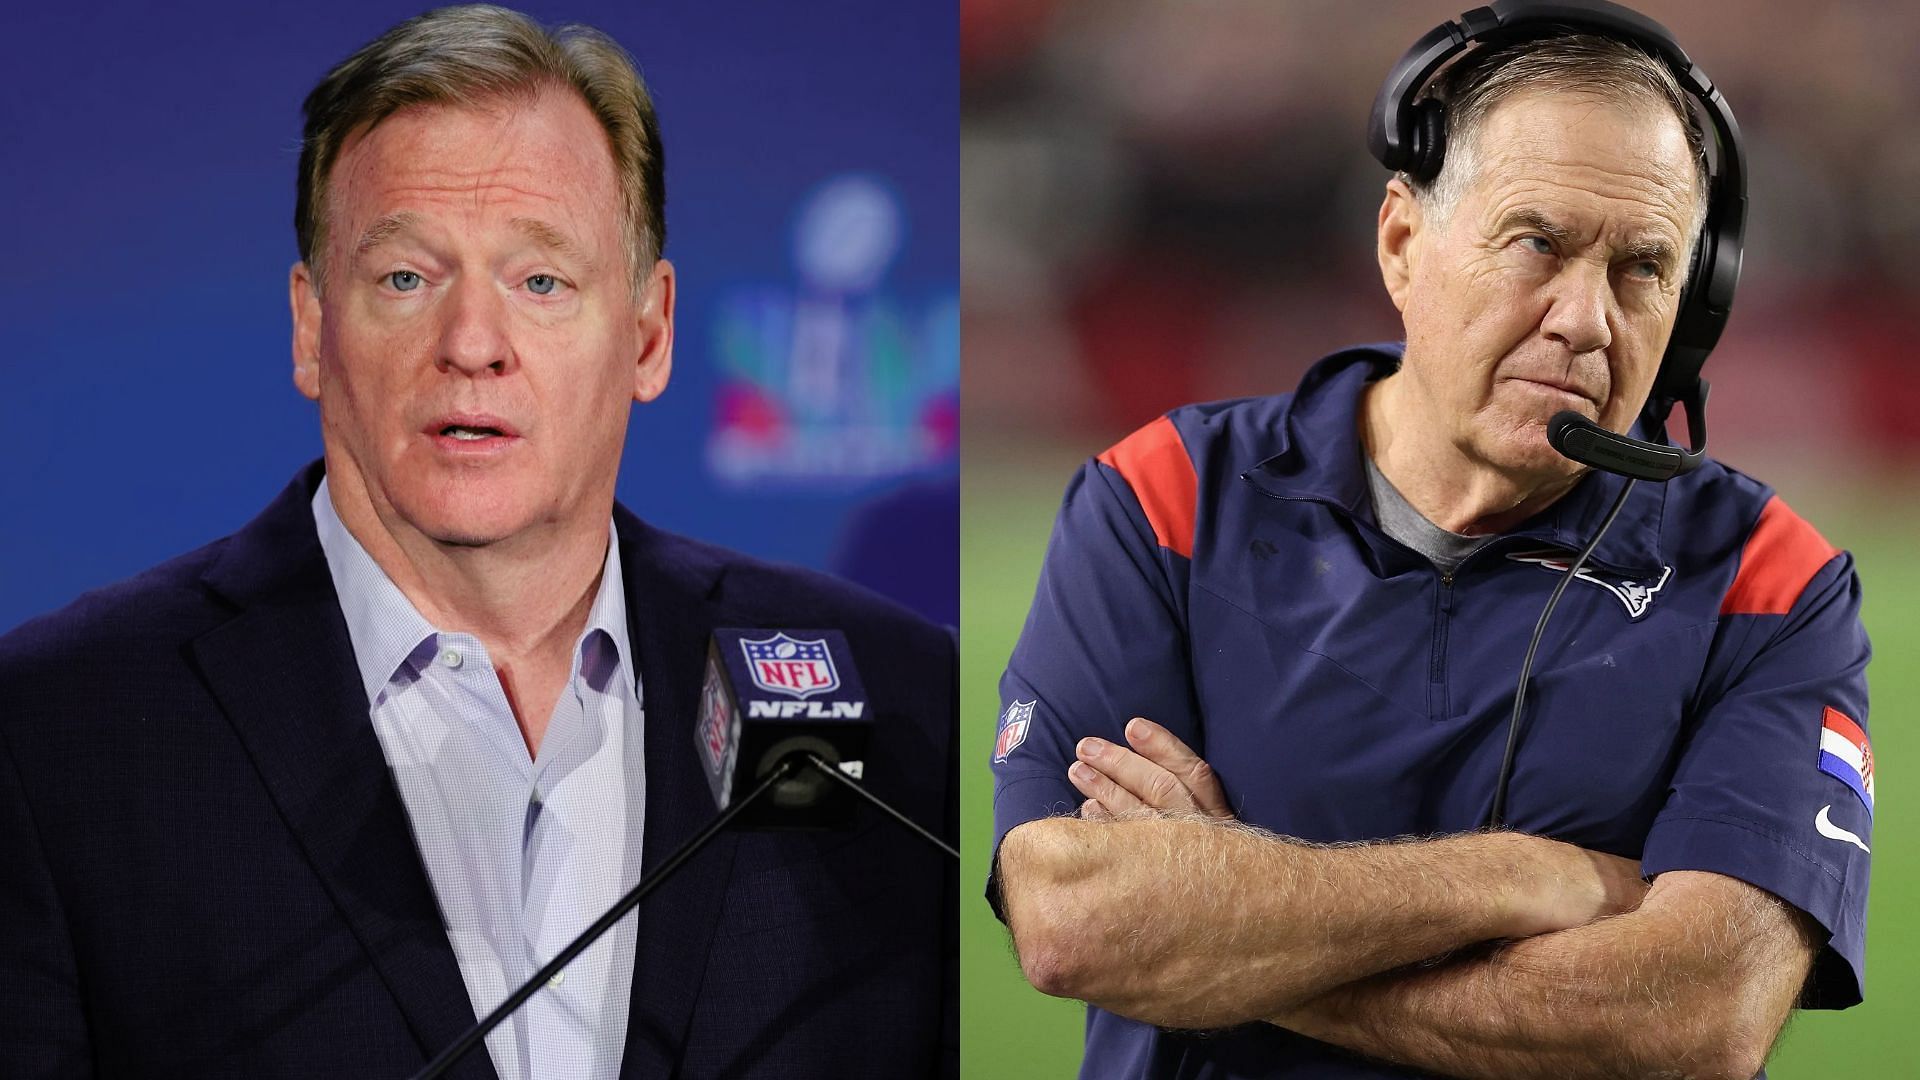 NFL Commissioner Roger Goodell and New England Patriots head coach Bill Belichick